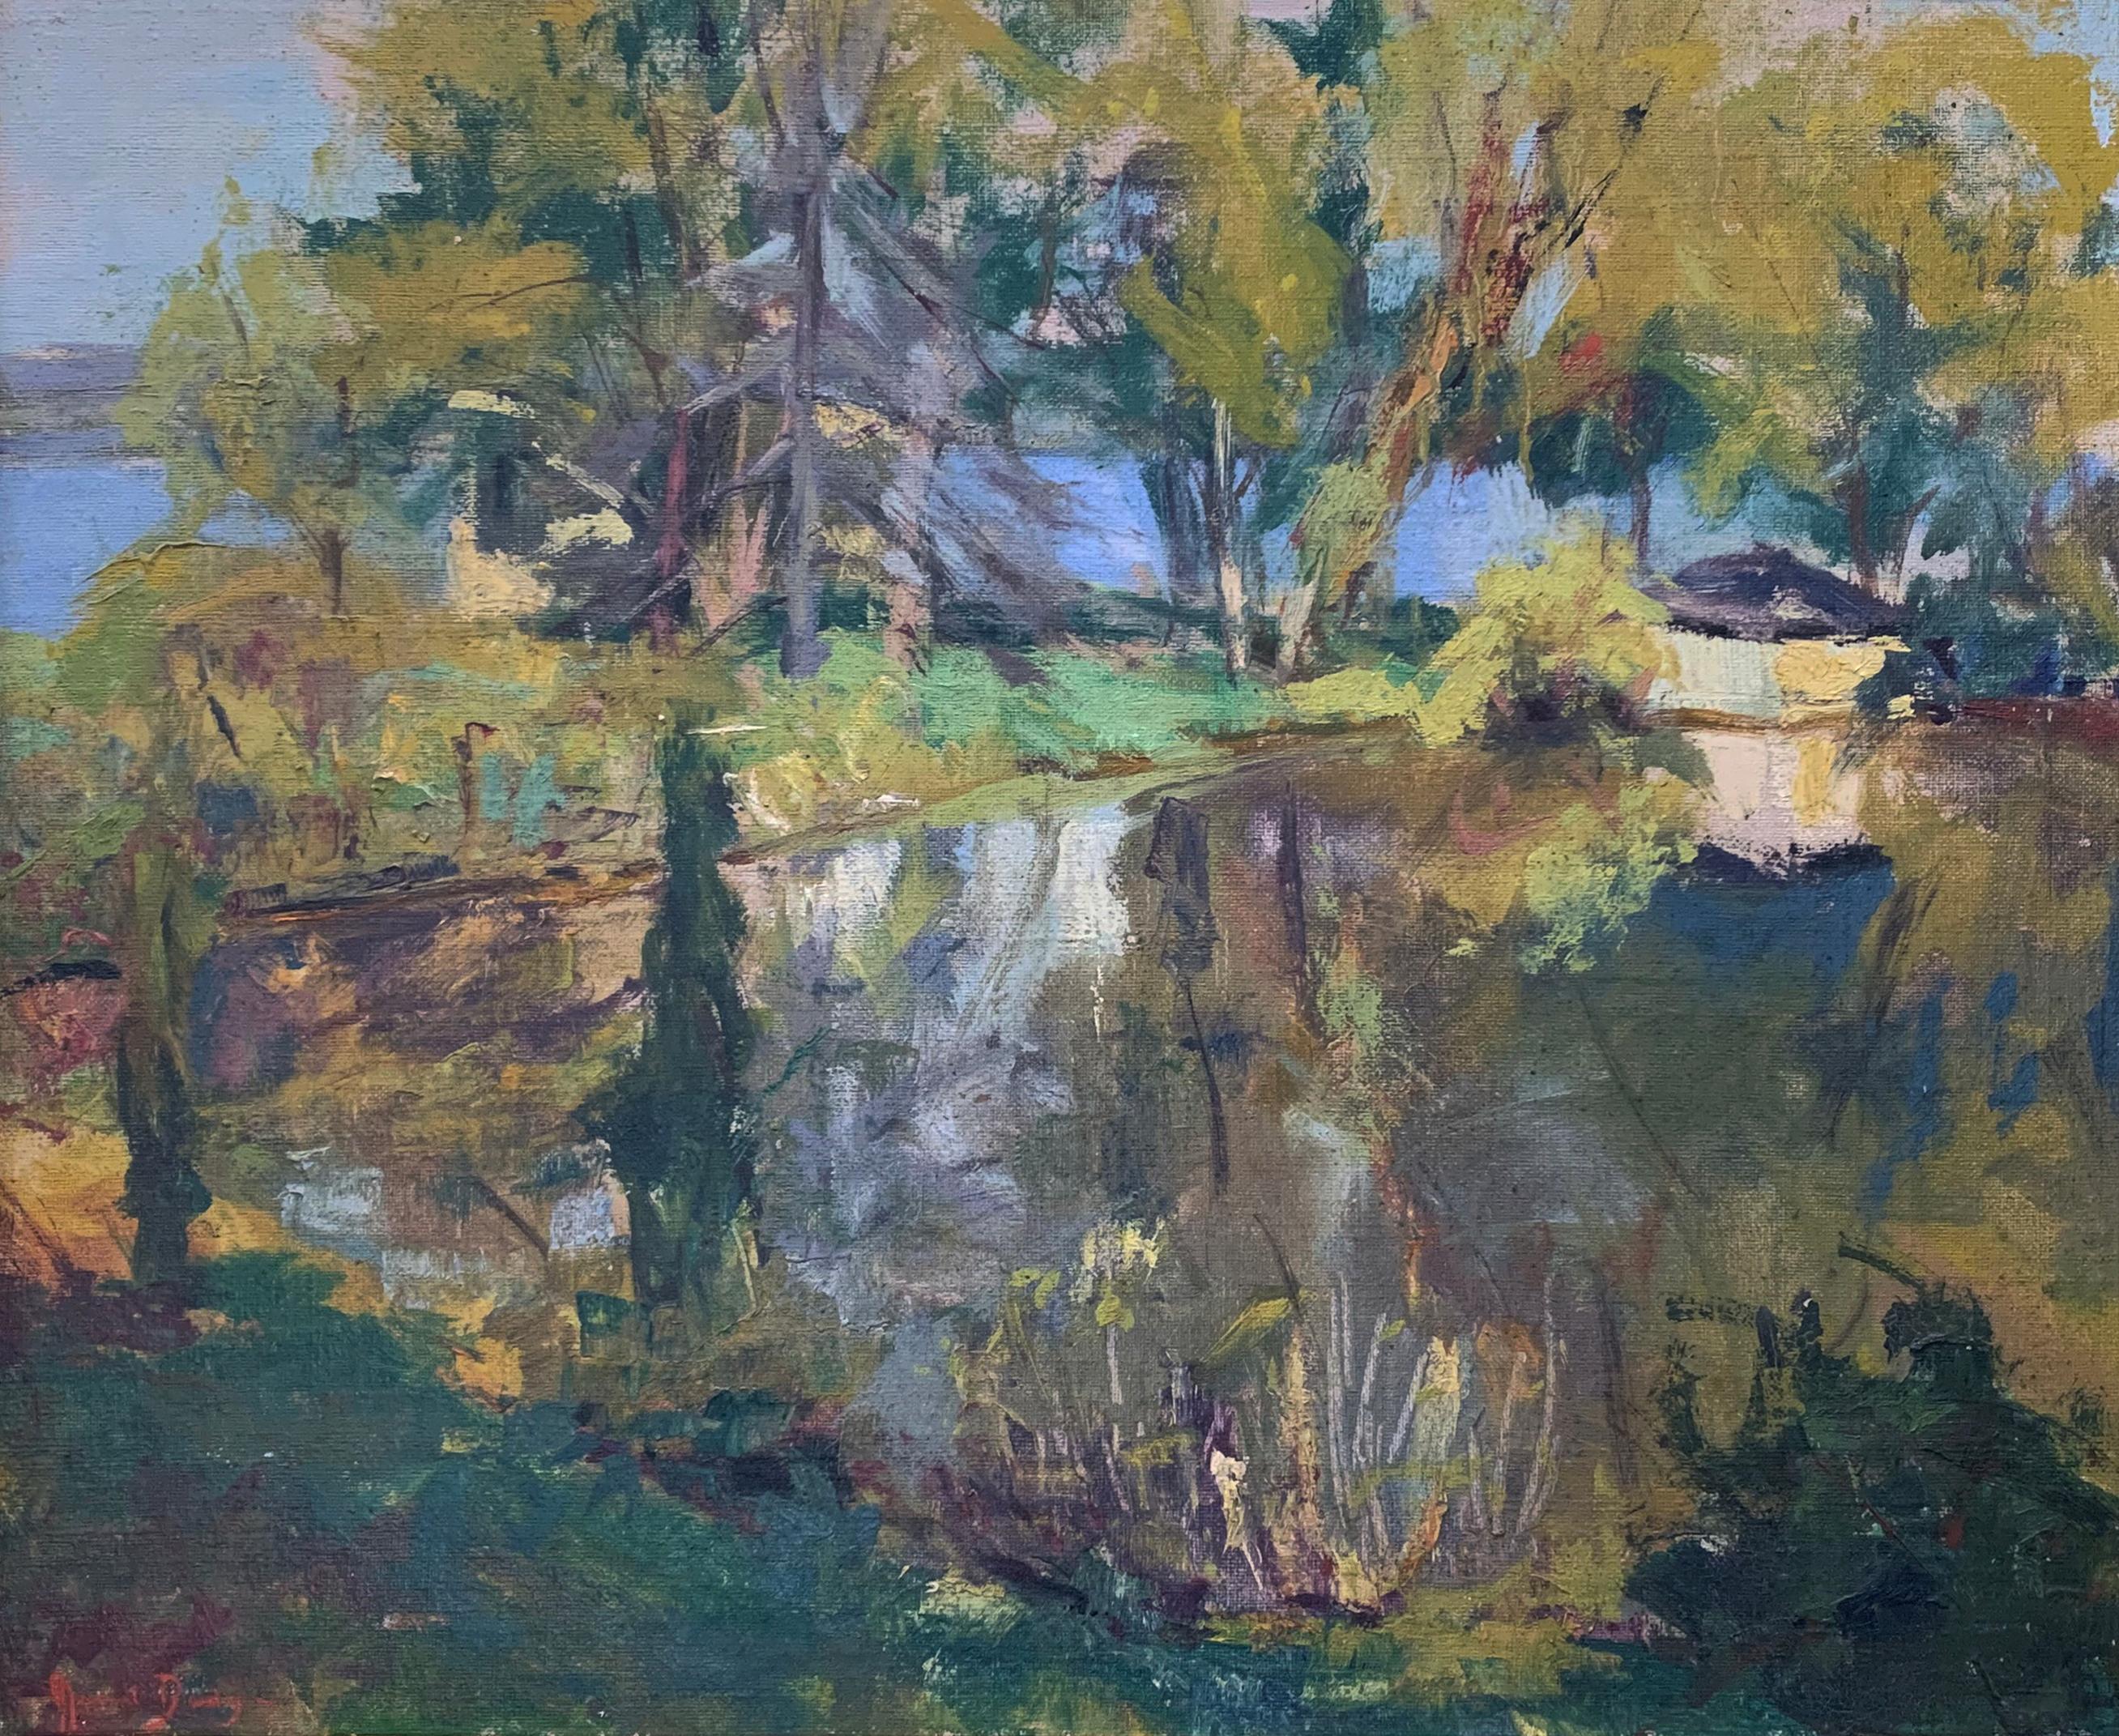 The Pond, Landscape with house, New Mexico artist, signed, 1940s, Period frame - Painting by Mabel Dodge Lujan 